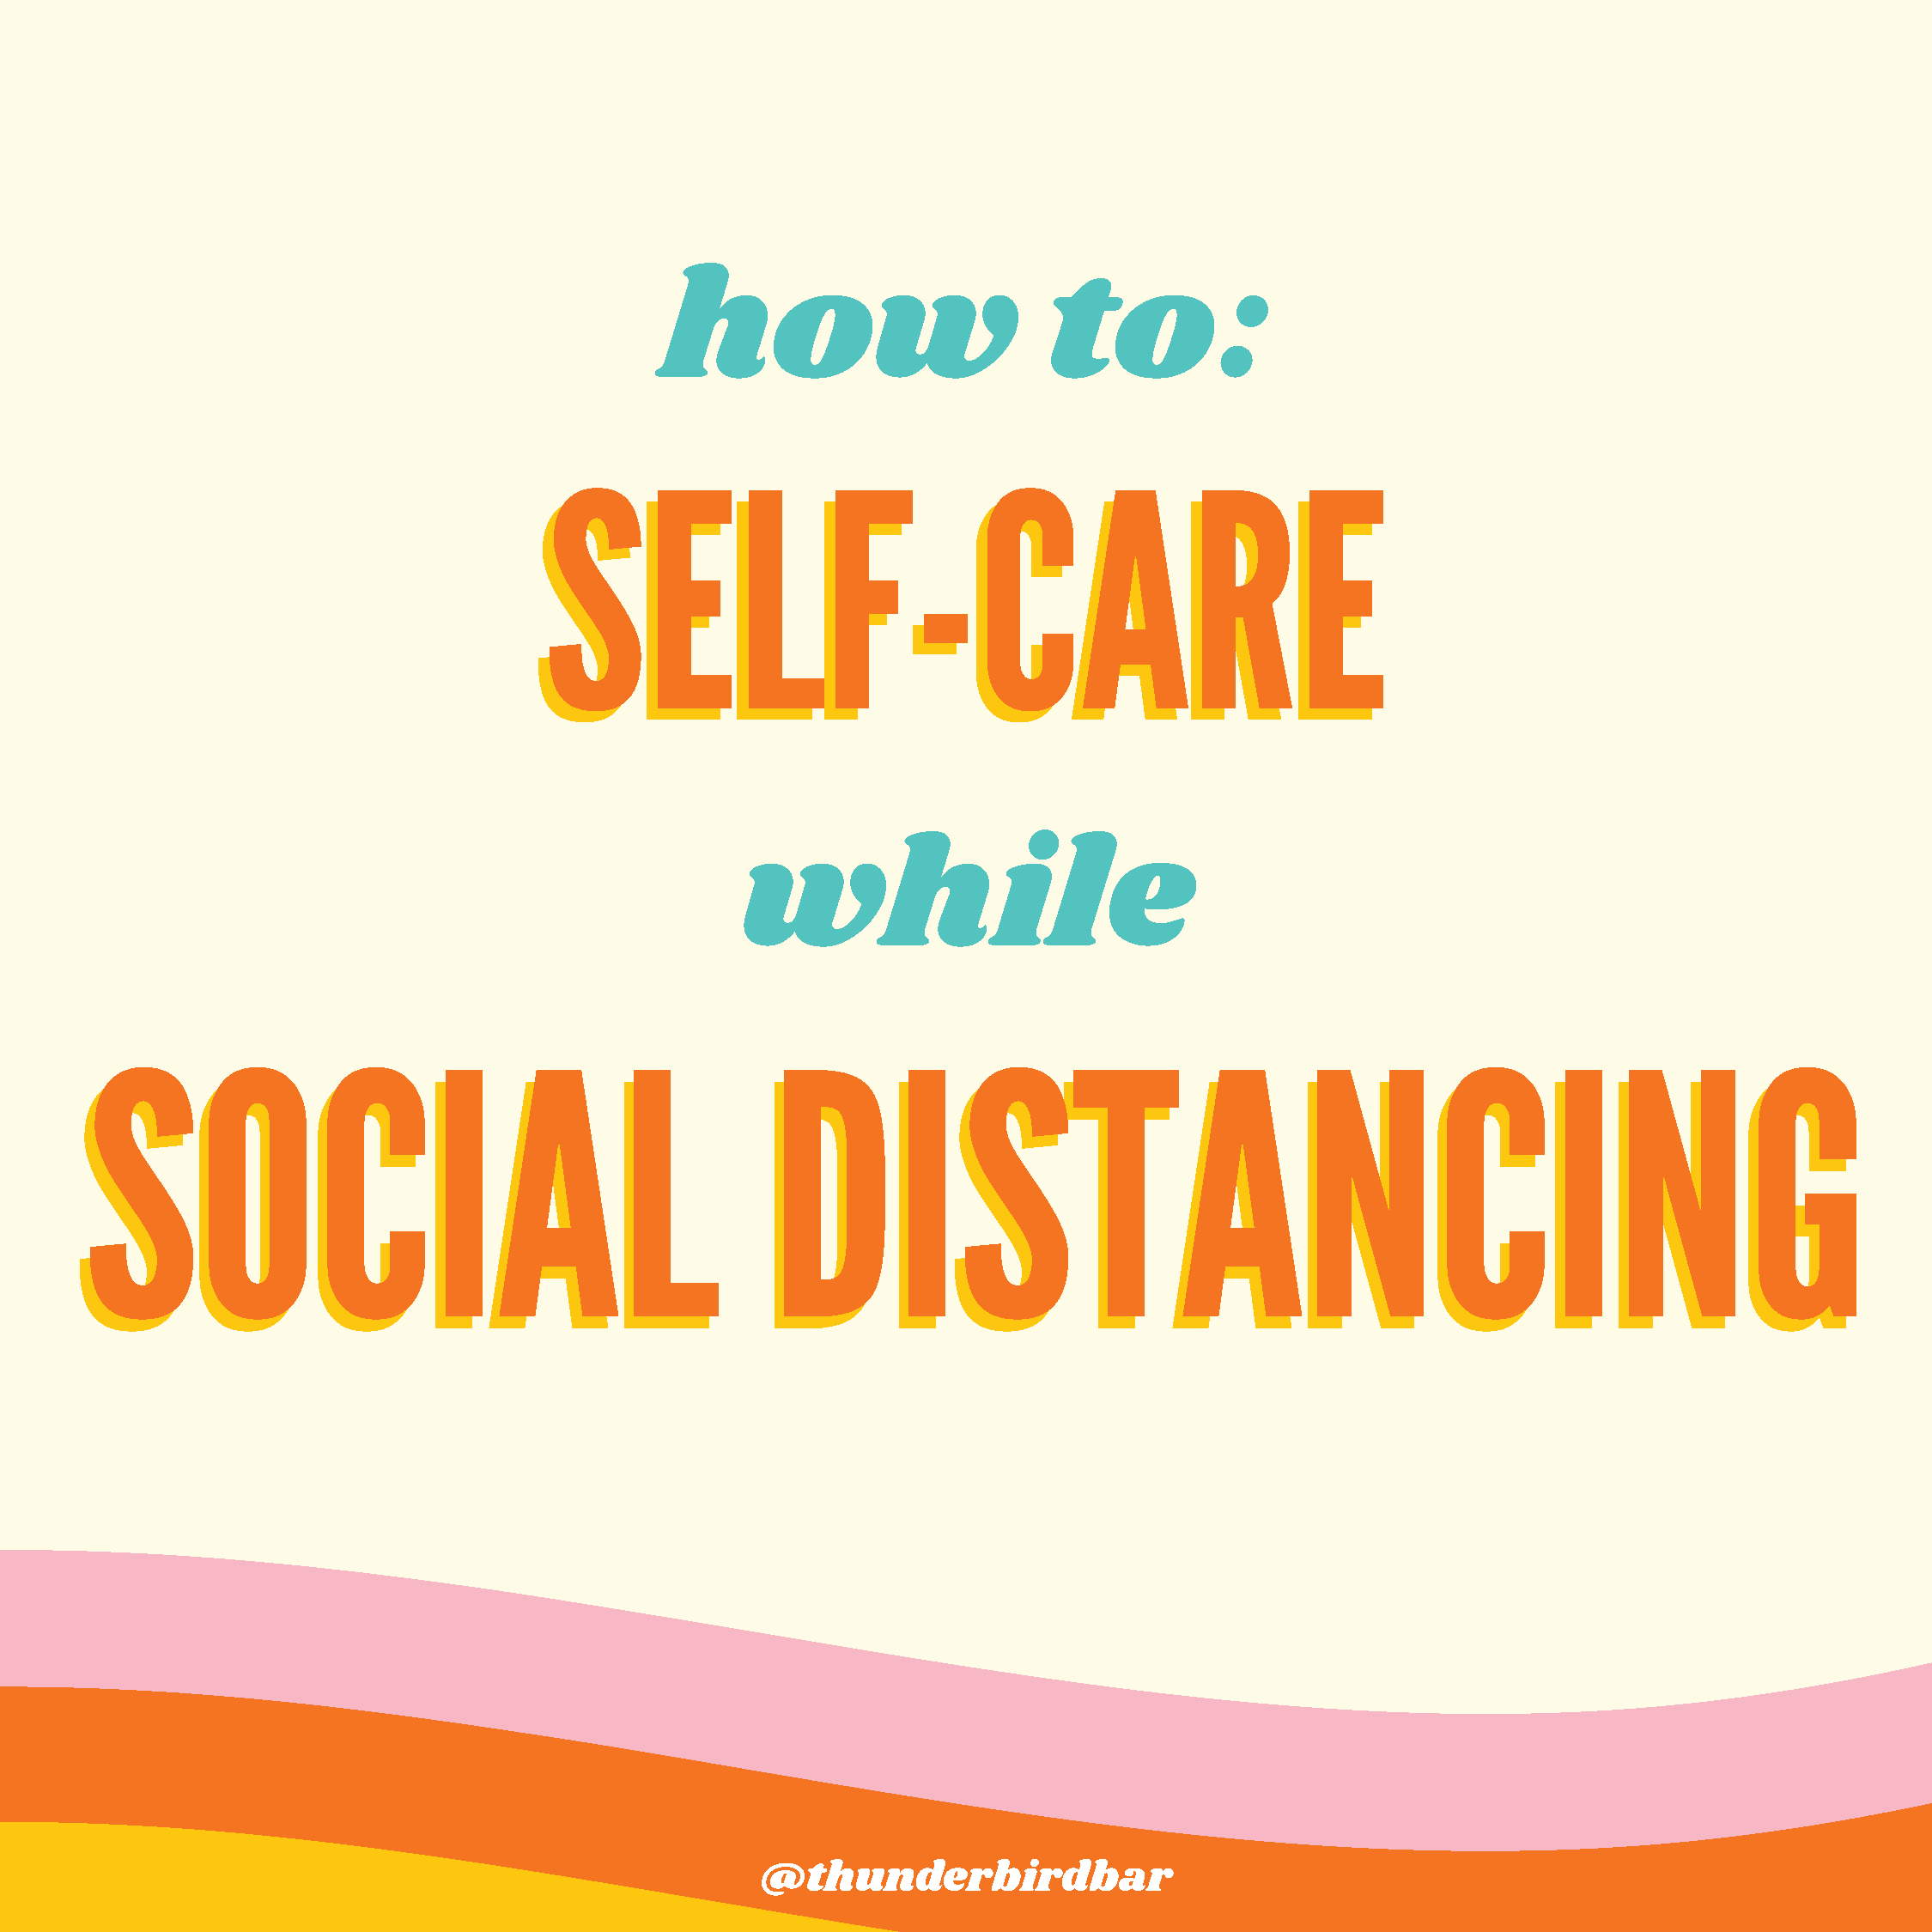 Self-Care While Social Distancing